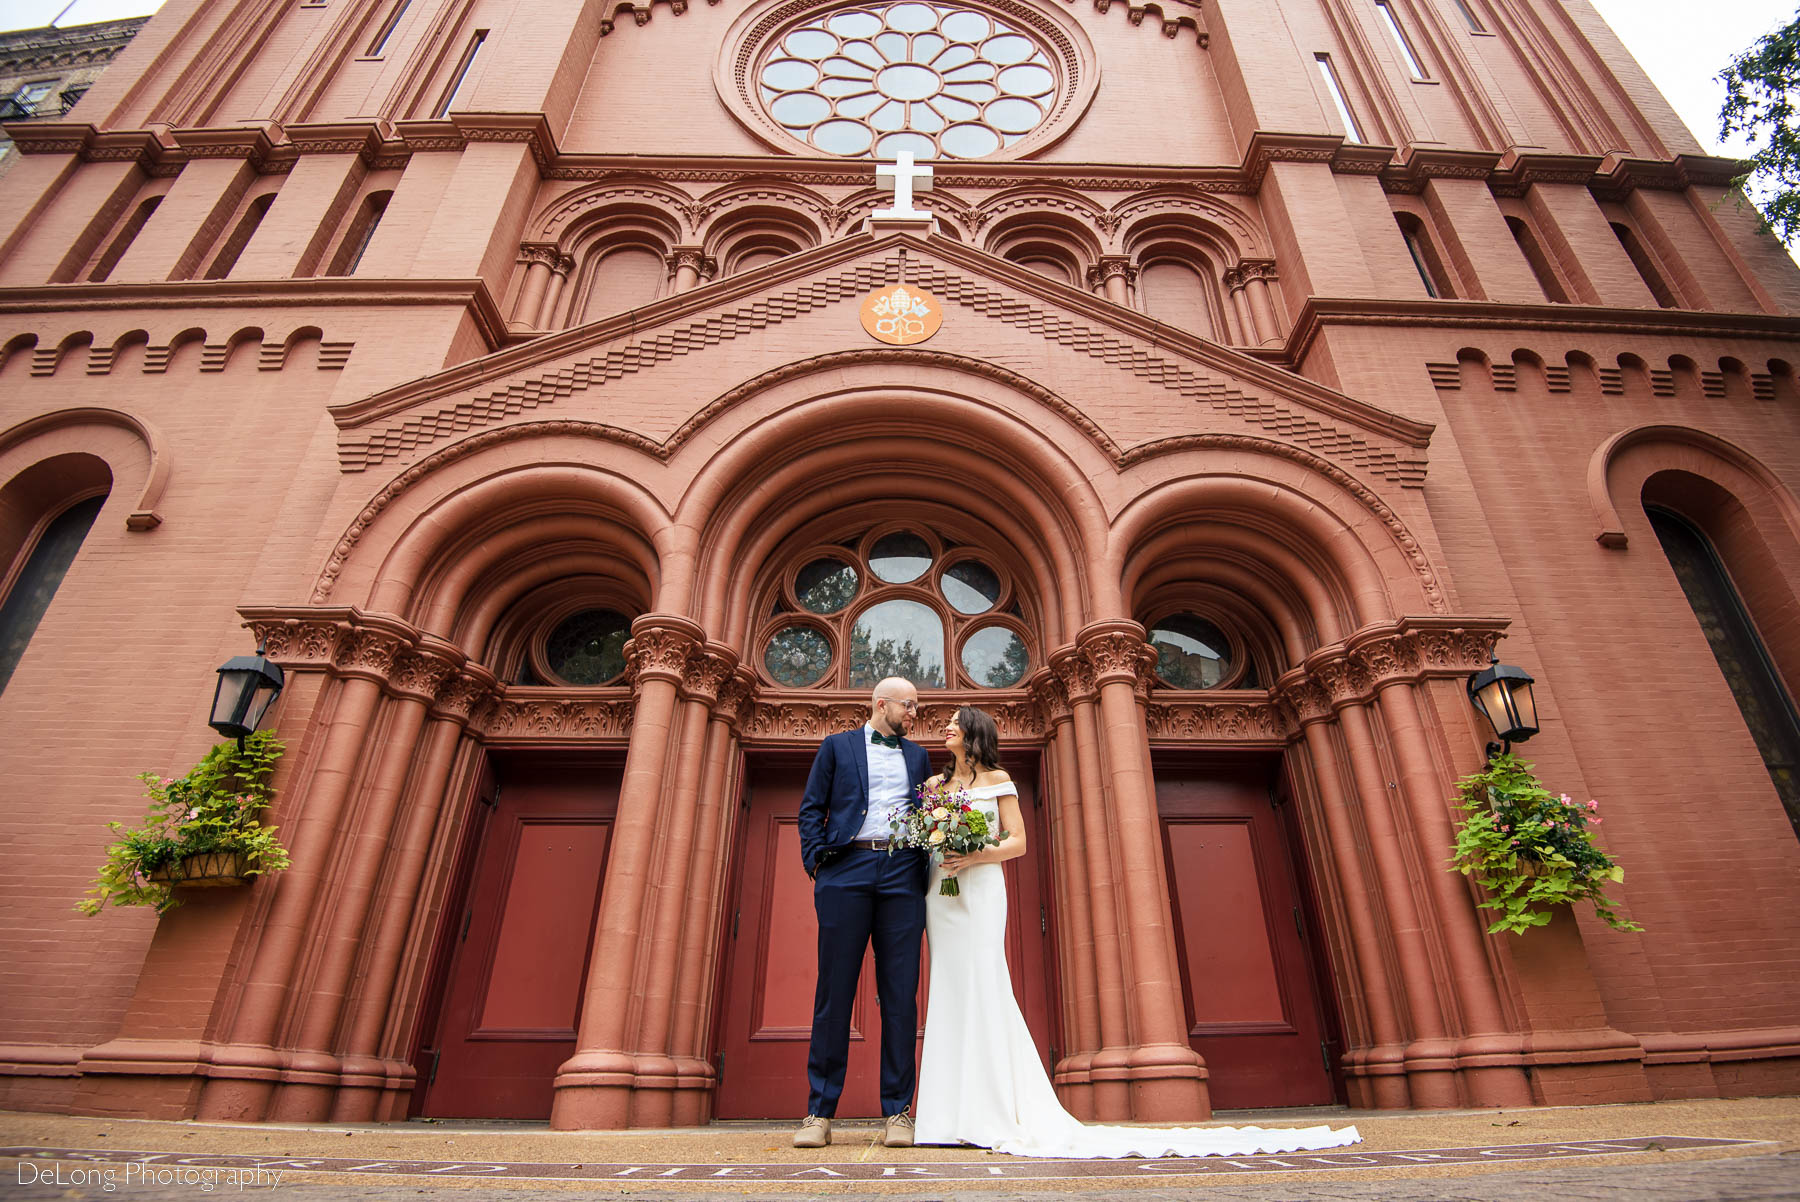 A ground-level portrait aimed upwards outside the Basilica of the Sacred Heart of Jesus in Atlanta, GA by Charlotte wedding photographers DeLong Photography